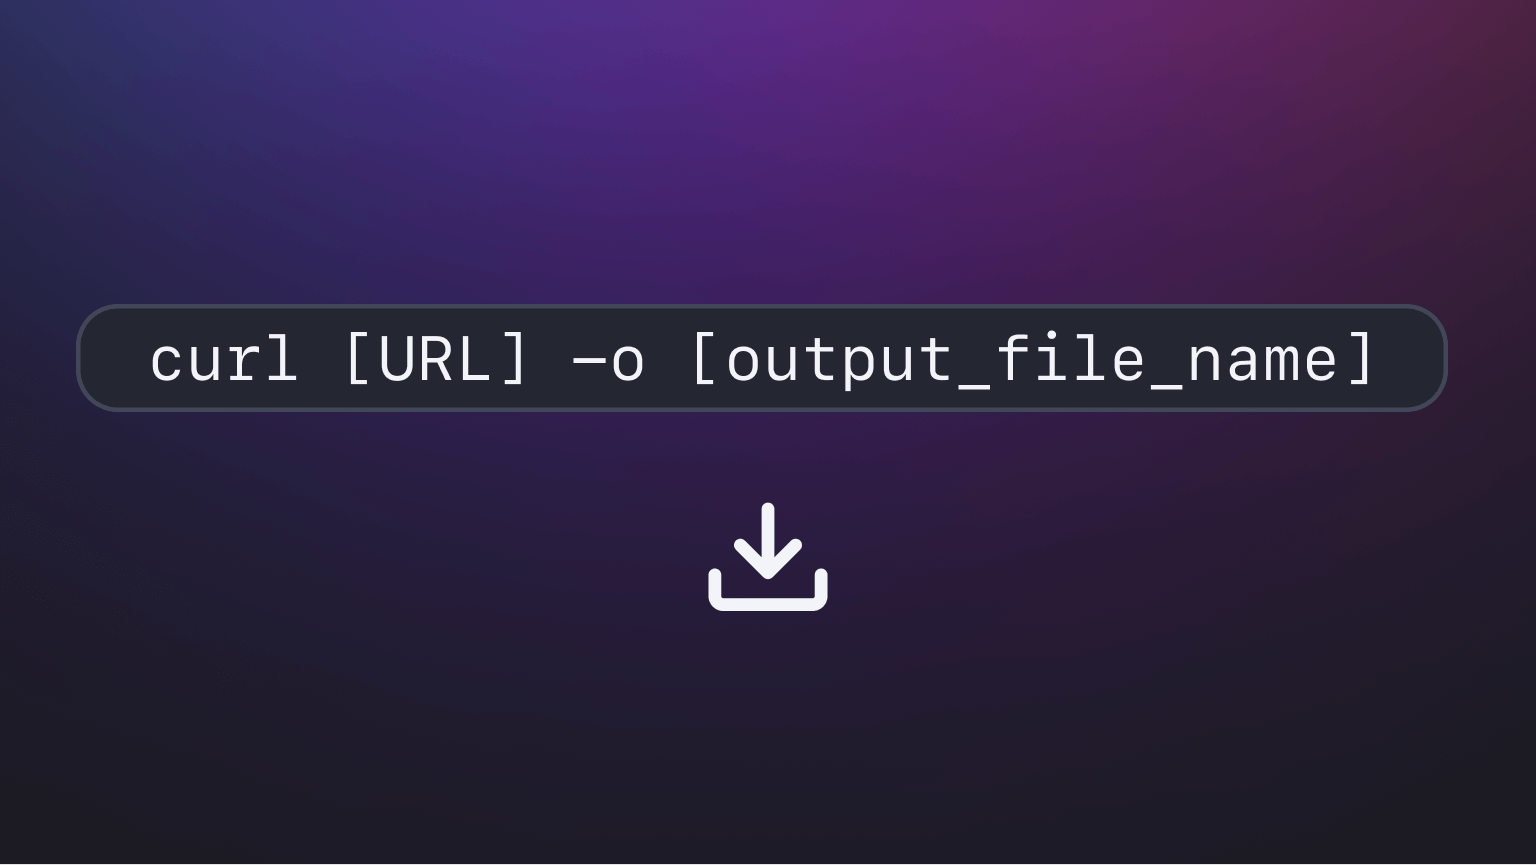 How to download a file with cURL